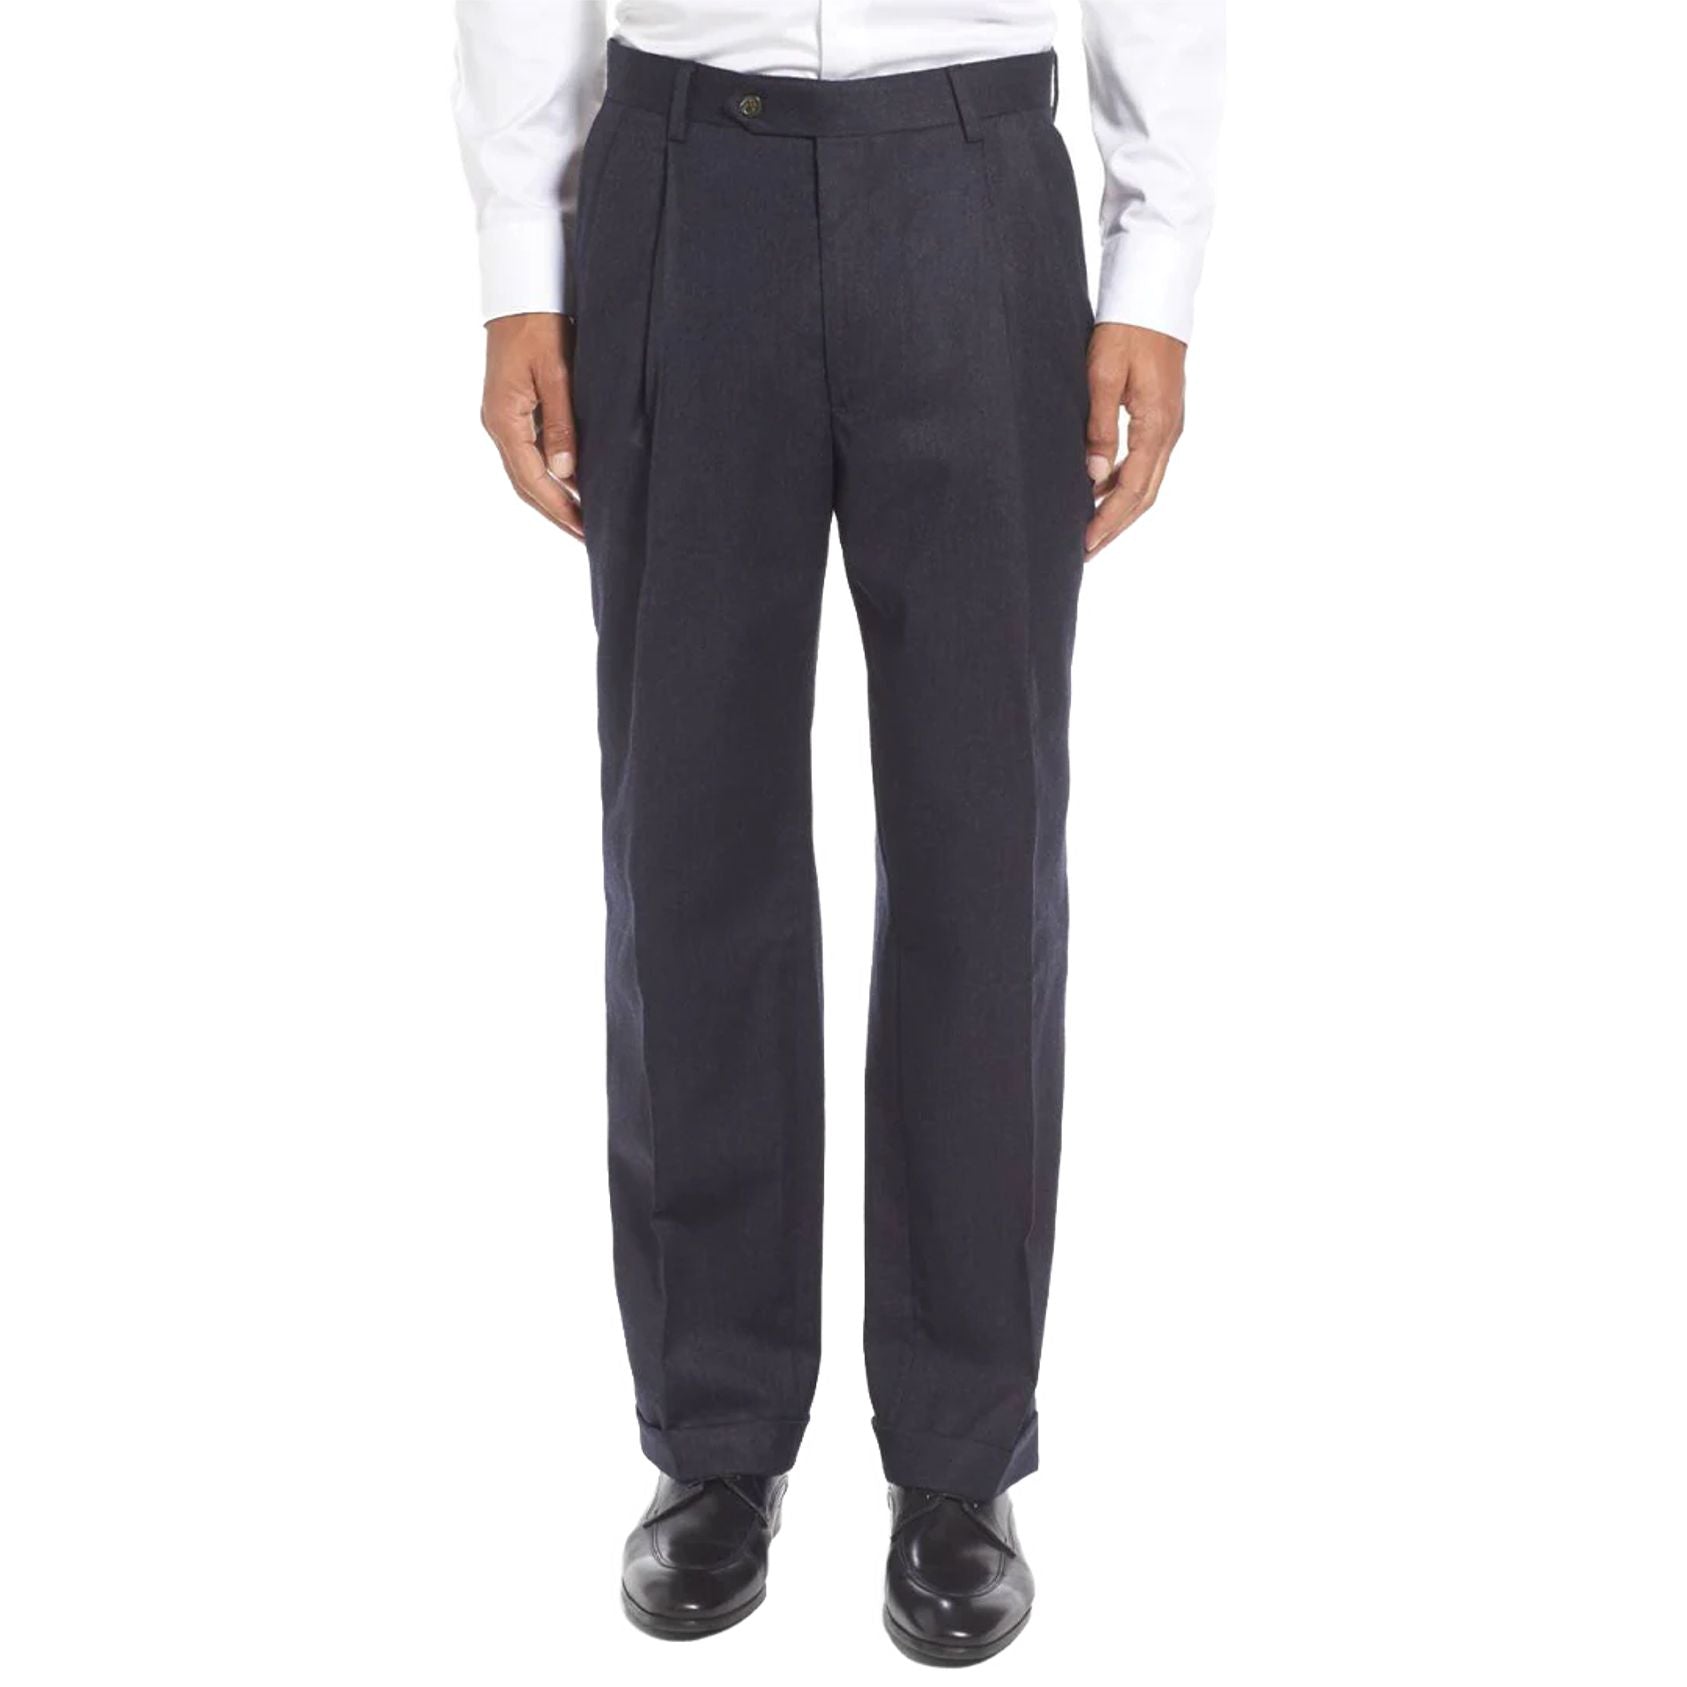 Super 100s Worsted Wool Flannel Trouser in Charcoal Blue Heather (Milan Double Reverse Pleat) by Berle